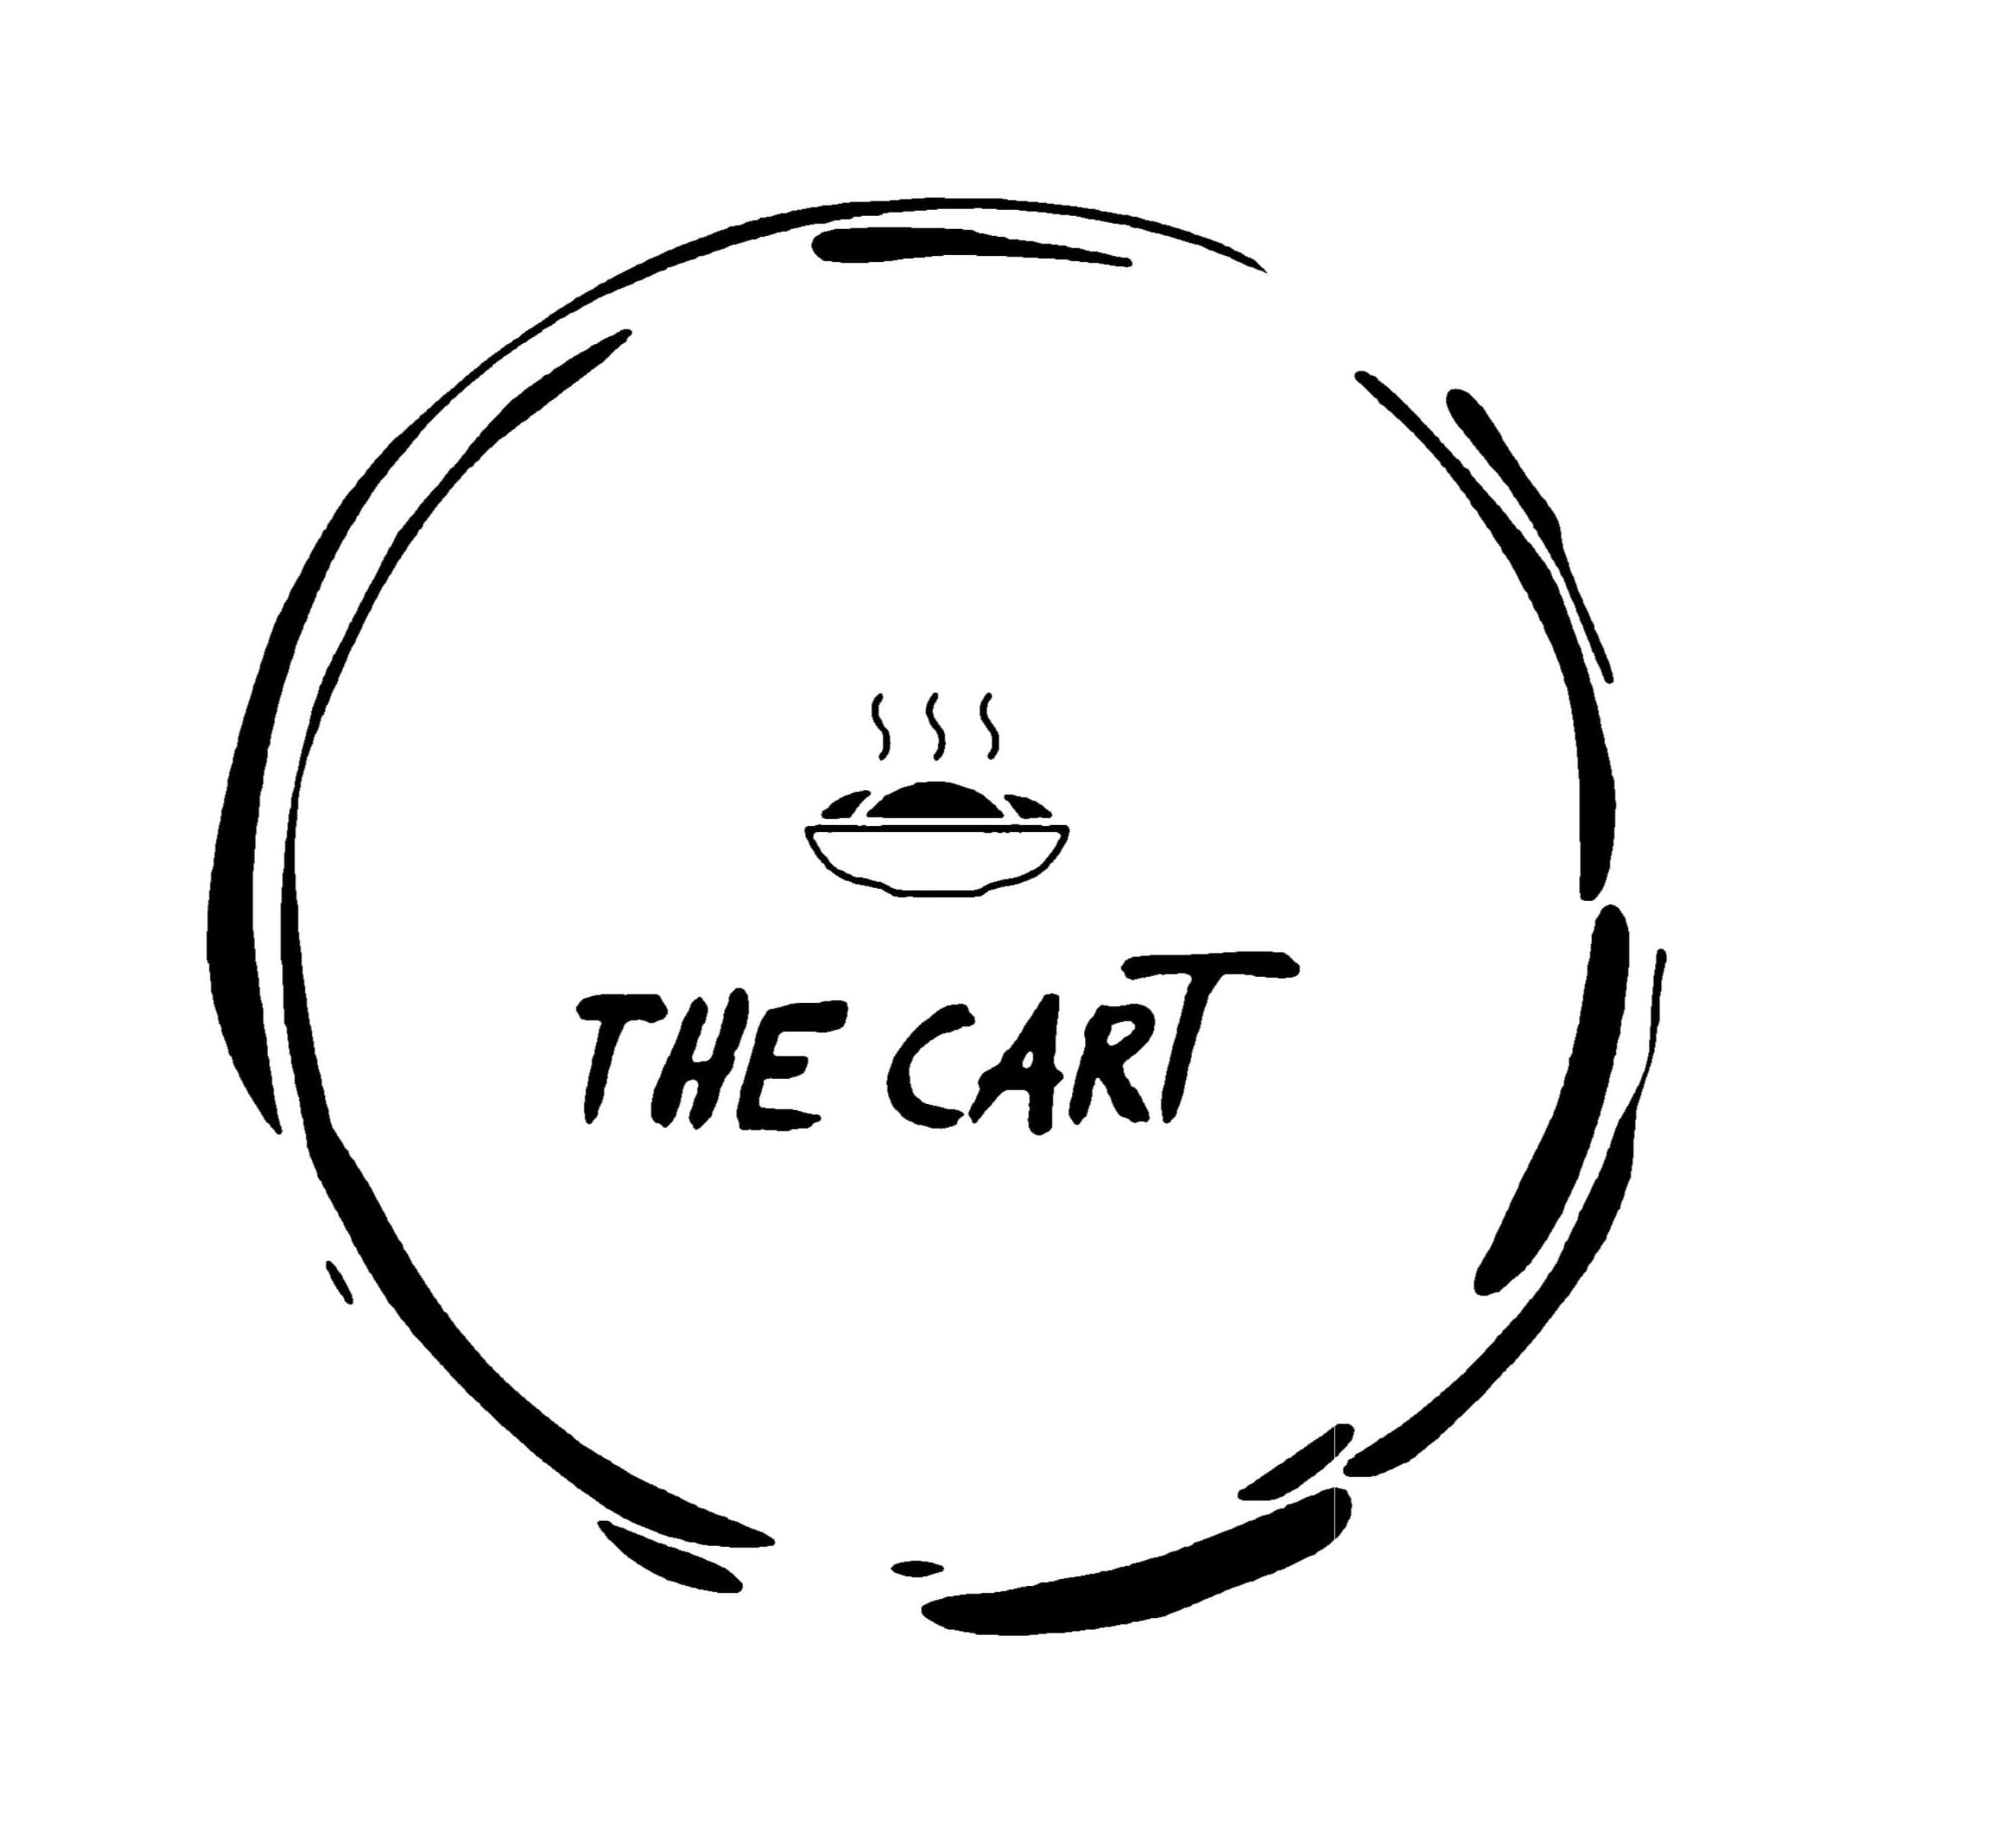 Thecart